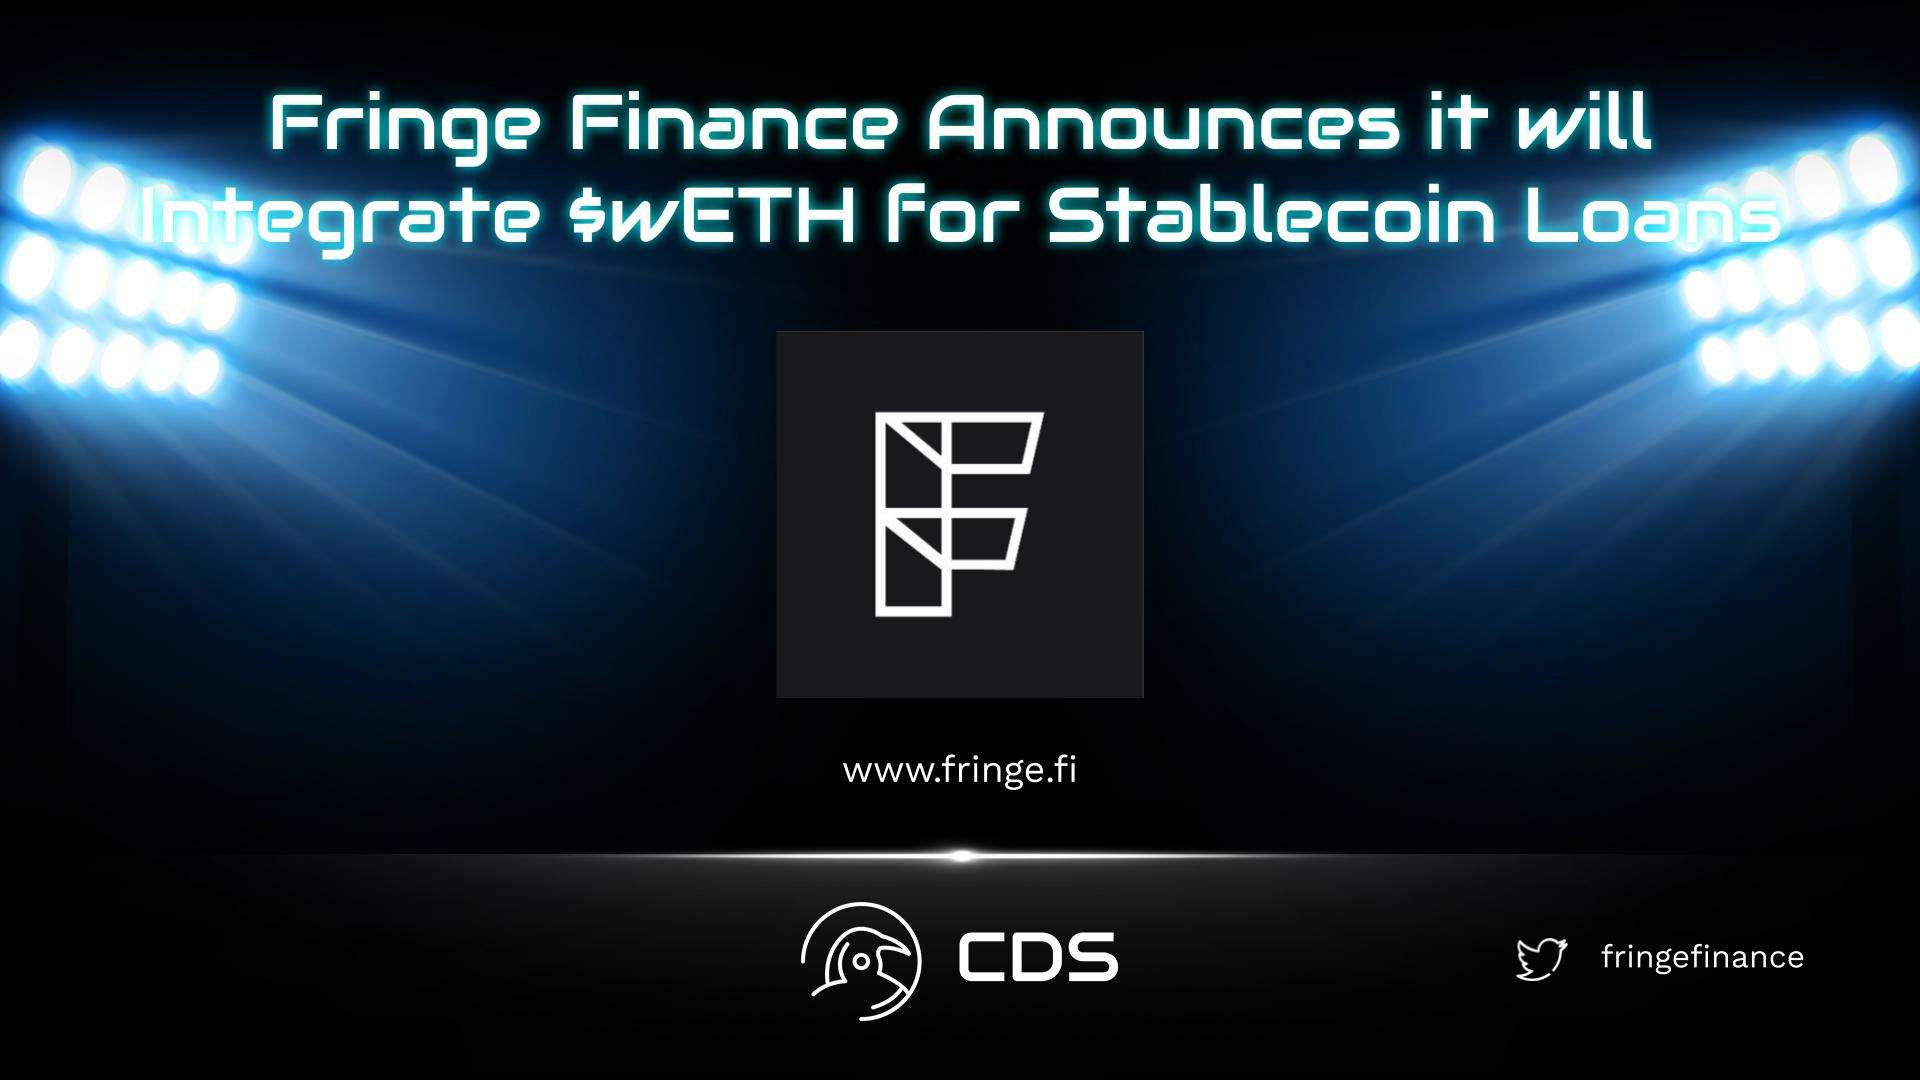 Fringe Finance Announces it will Integrate $wETH for Stablecoin Loans